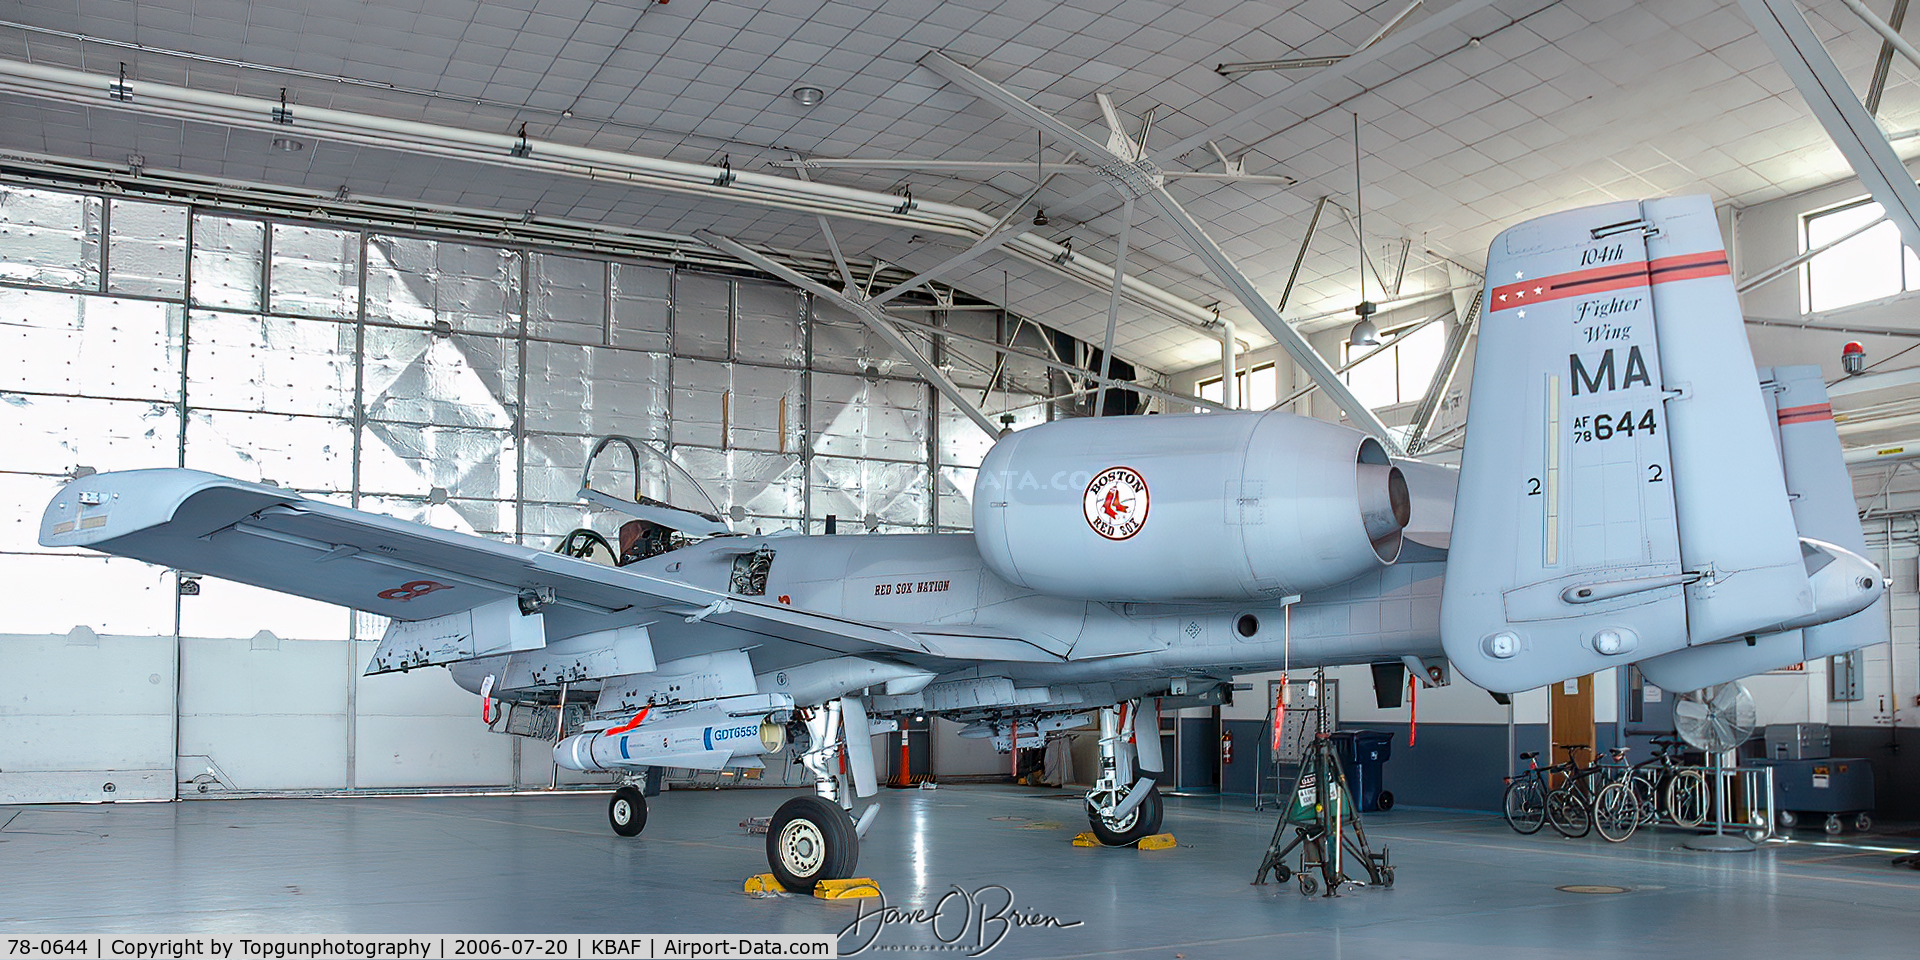 78-0644, 1978 Fairchild Republic A-10C Thunderbolt II C/N A10-0264, phase dock for overhaul of wires